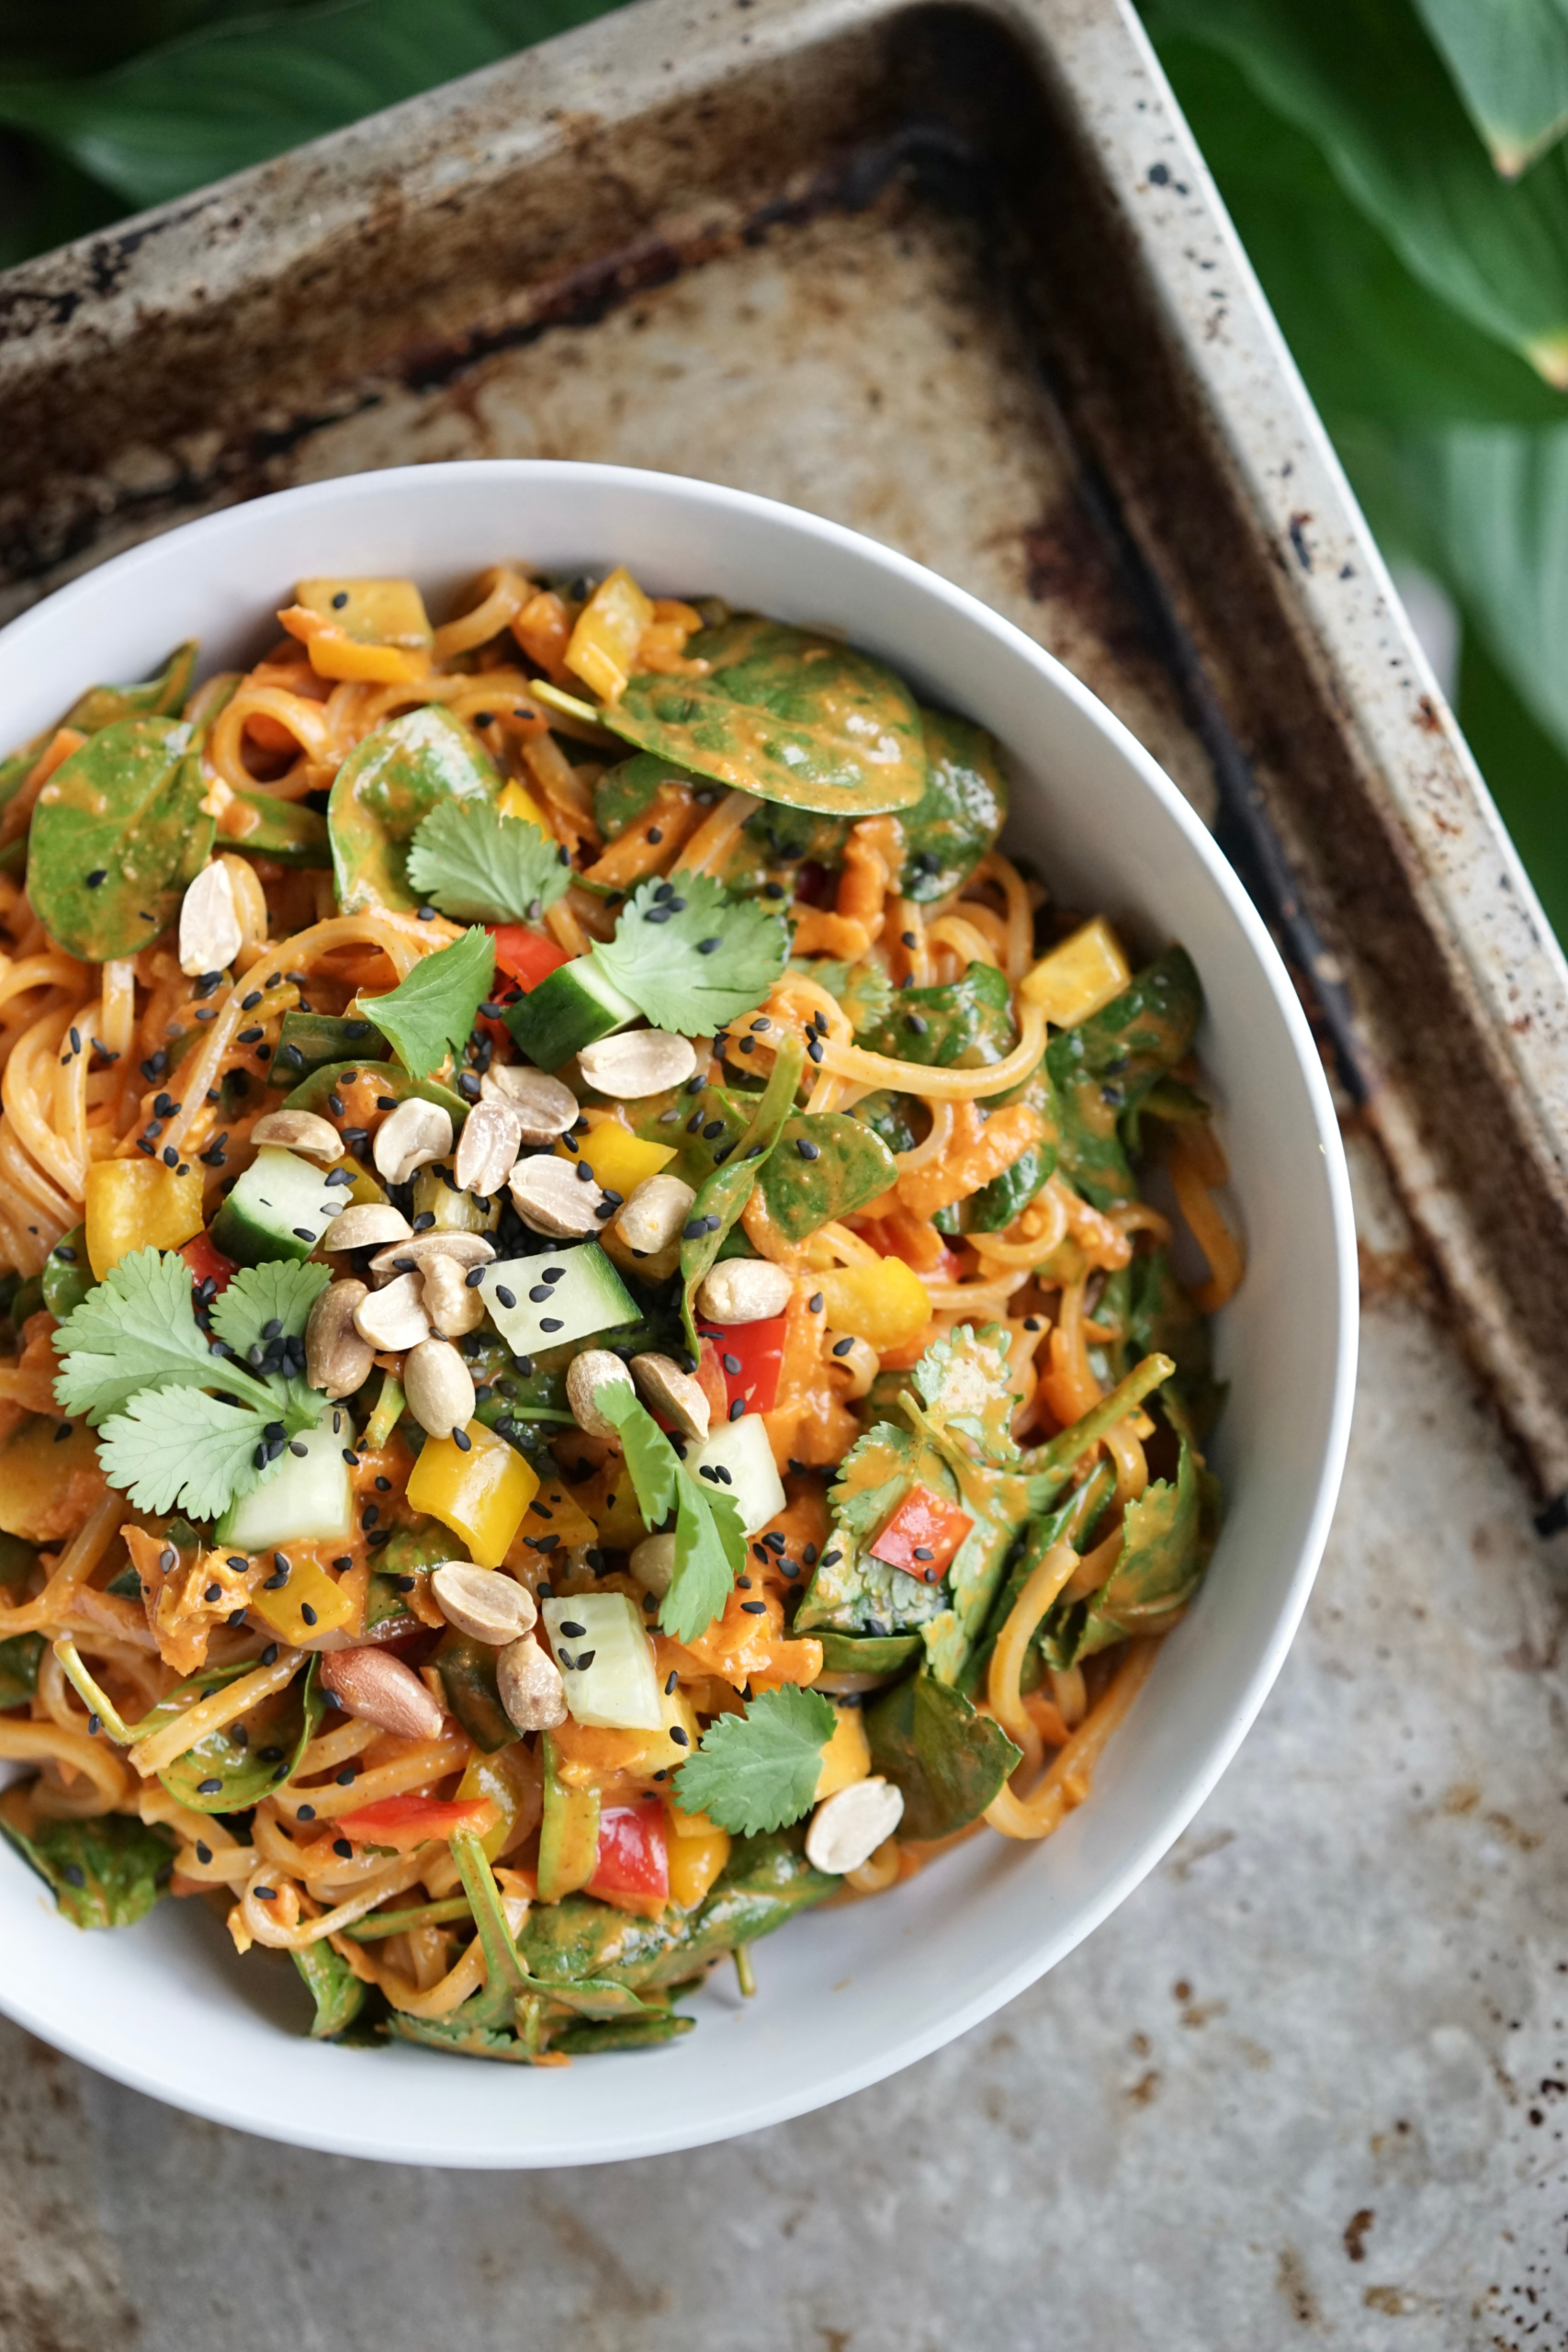 Gochujang Peanut Noodles with Veggies | Living Healthy in Seattle